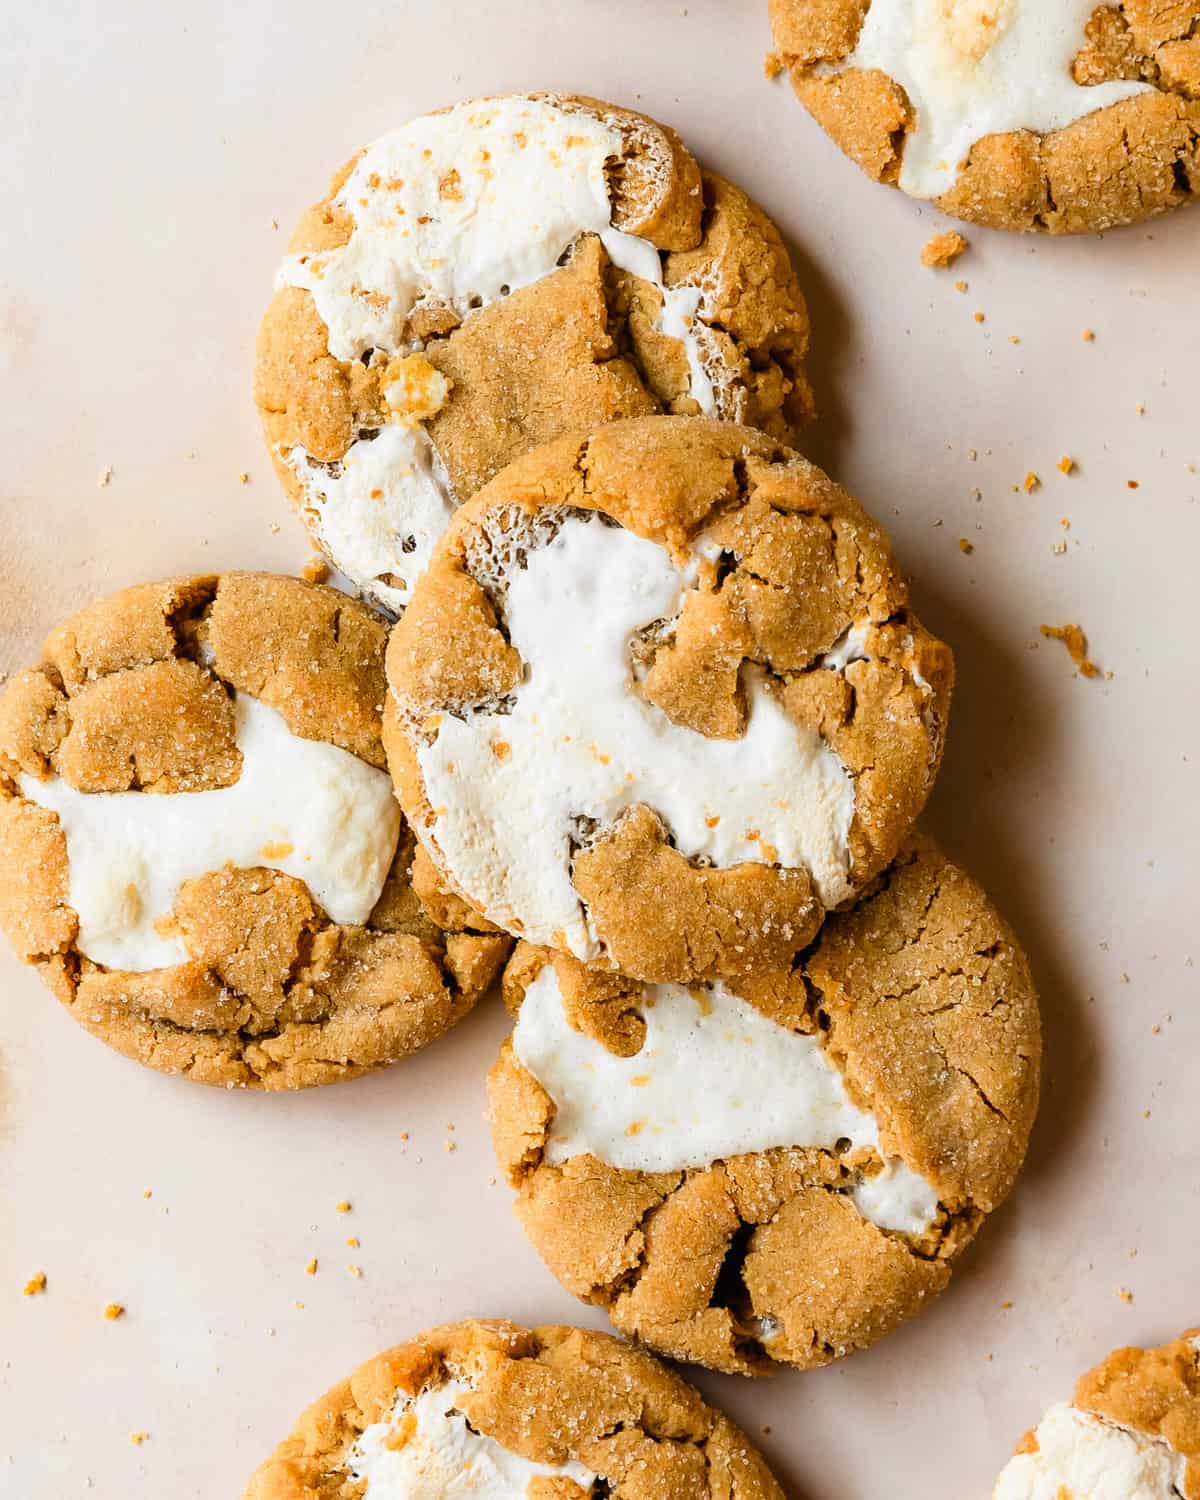 Fluffernutter cookies are soft and chewy peanut butter cookies filled with gooey marshmallow fluff, rolled in a crunchy sugar coating. These peanut butter marshmallow cookies are easy to make and taste just the classic fluffernutter sandwich, as a cookie. 